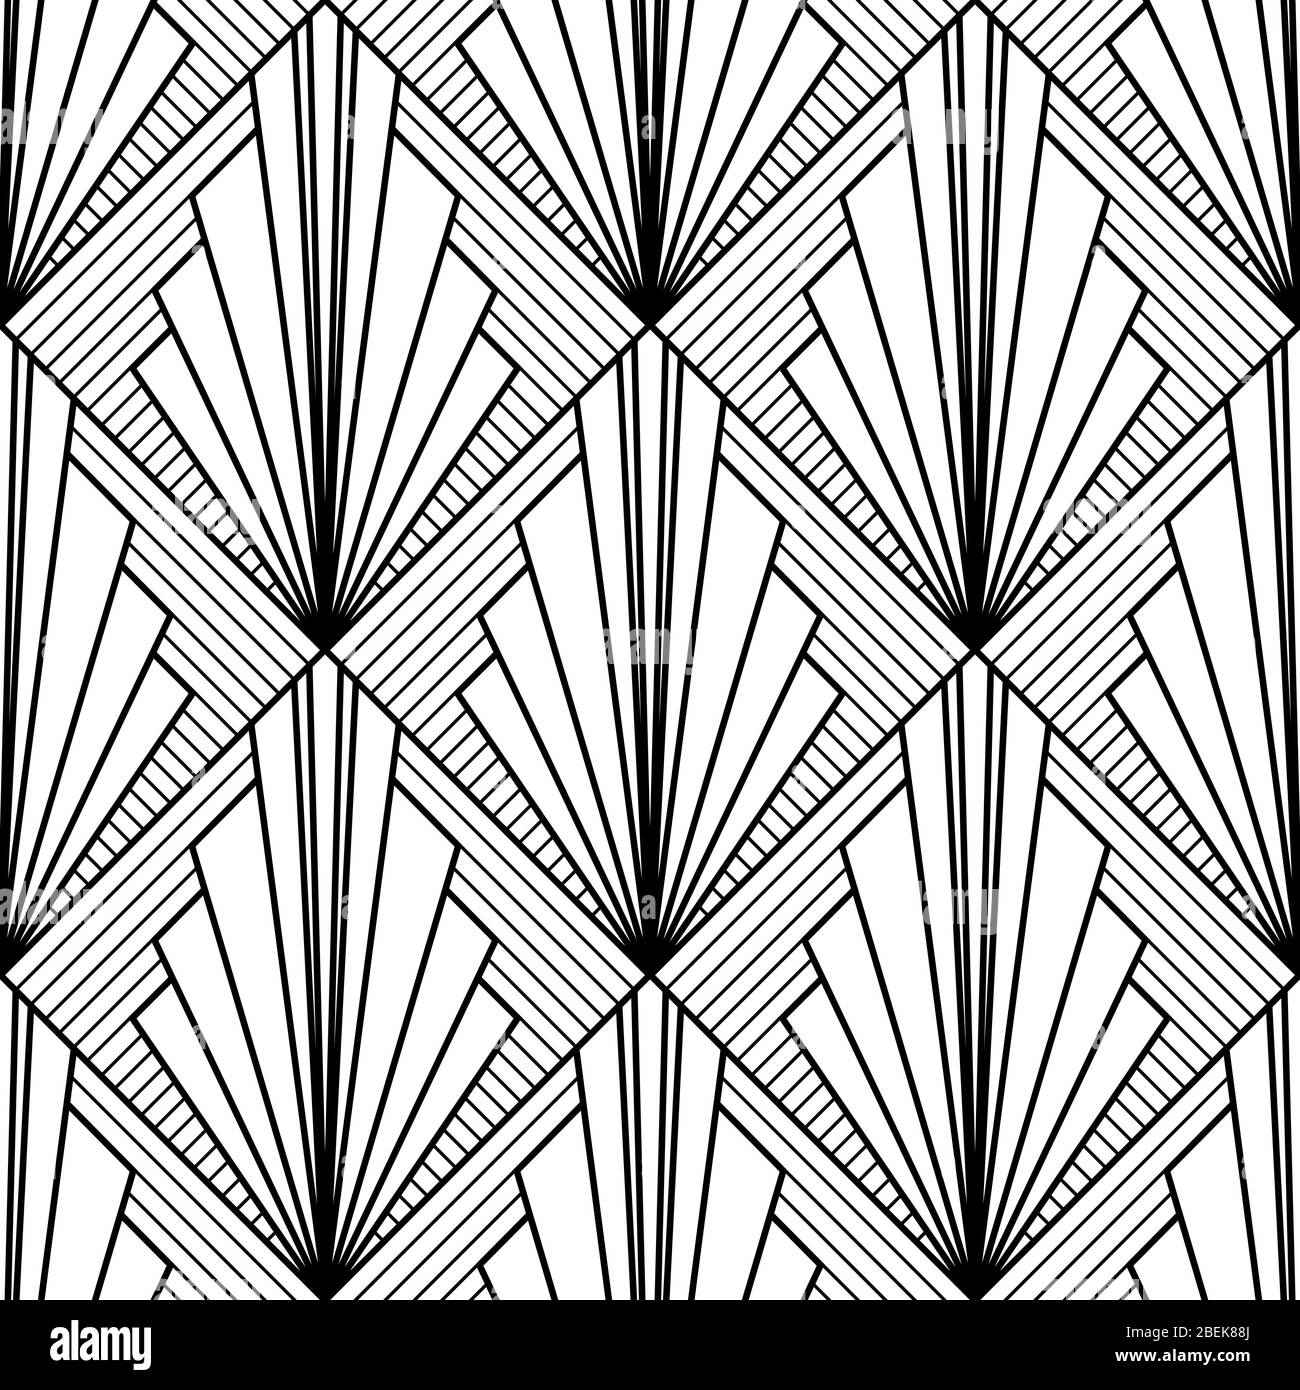 Art deco pattern Black and White Stock Photos & Images - Alamy